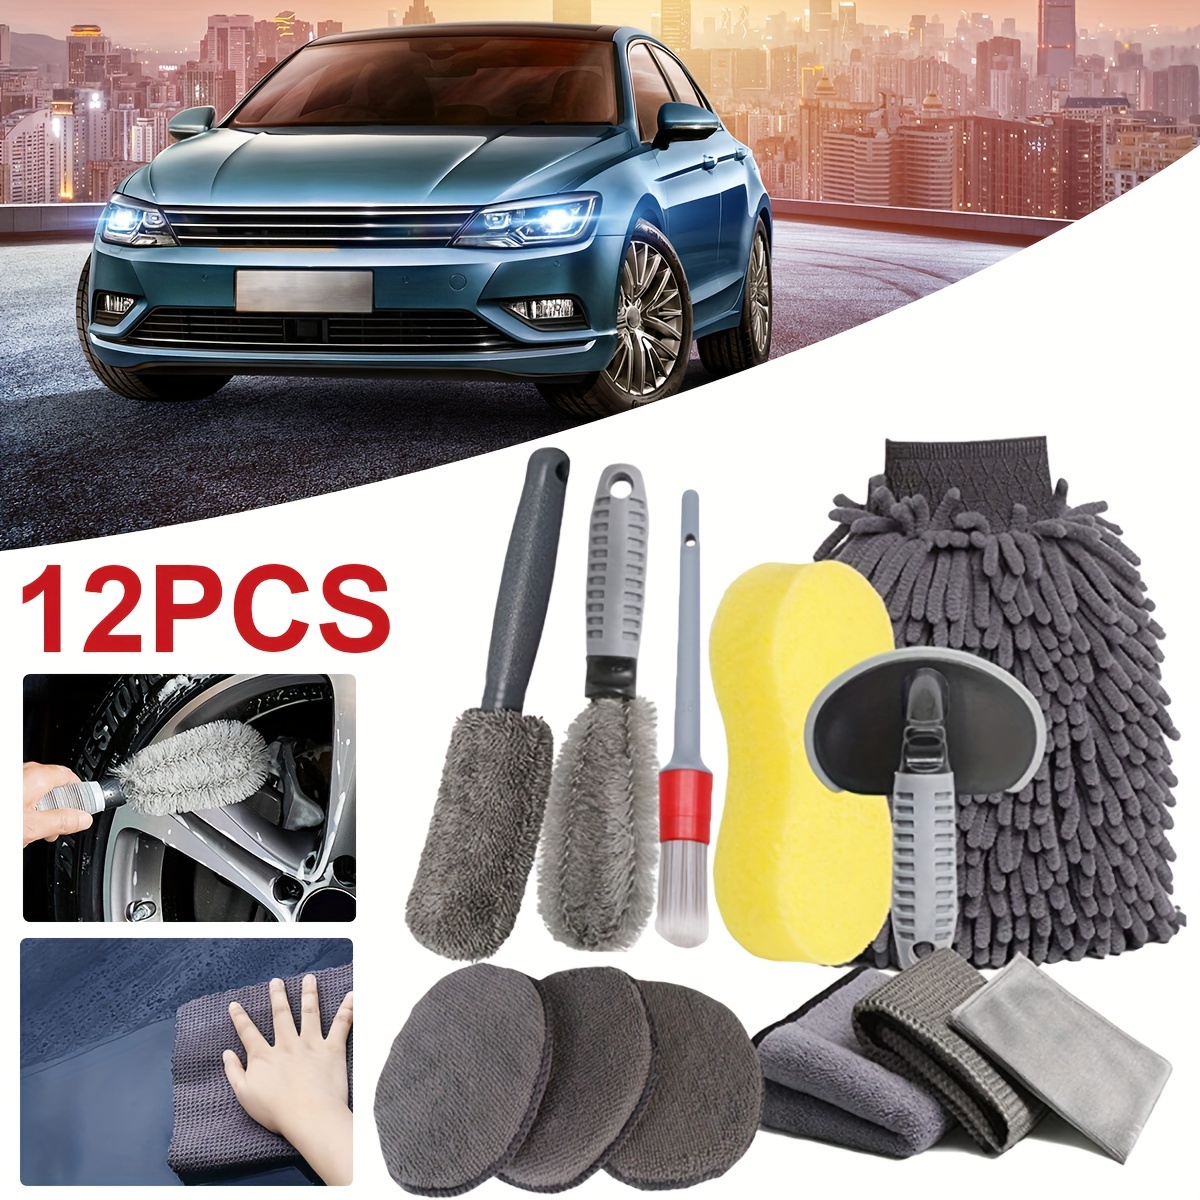  Car Wash Cleaning Kit with Foam Gun Sprayer, Car Wash Brush  with Long Handle, Car Detailing Kit, Car Cleaning Supplies Tools With Wheel  Drill Brush Set, Mop, Bucket, Wash Mitt, Interior